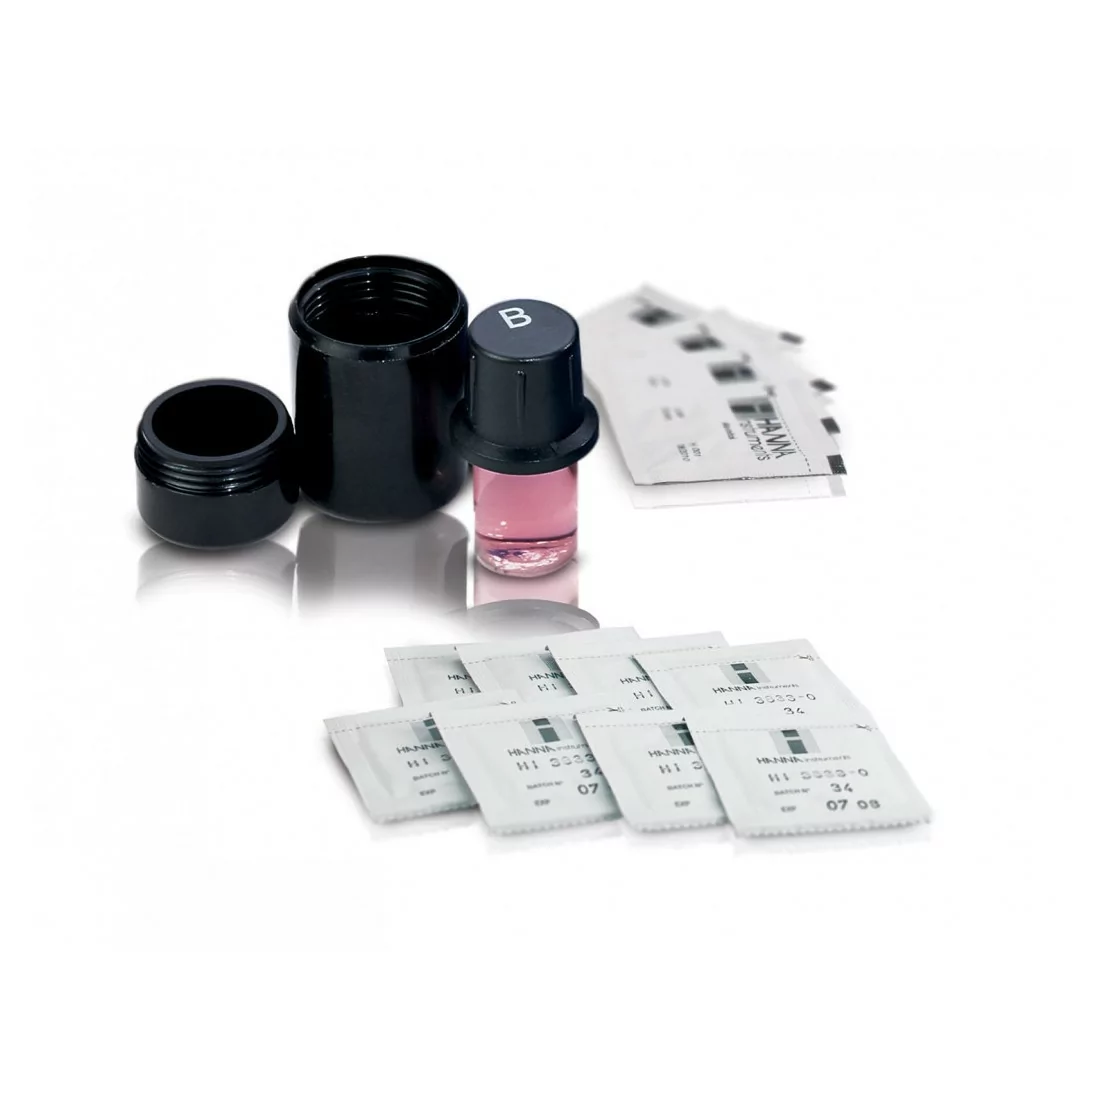 Reagents for Photometer series HI 83 and TI 96 (KH)